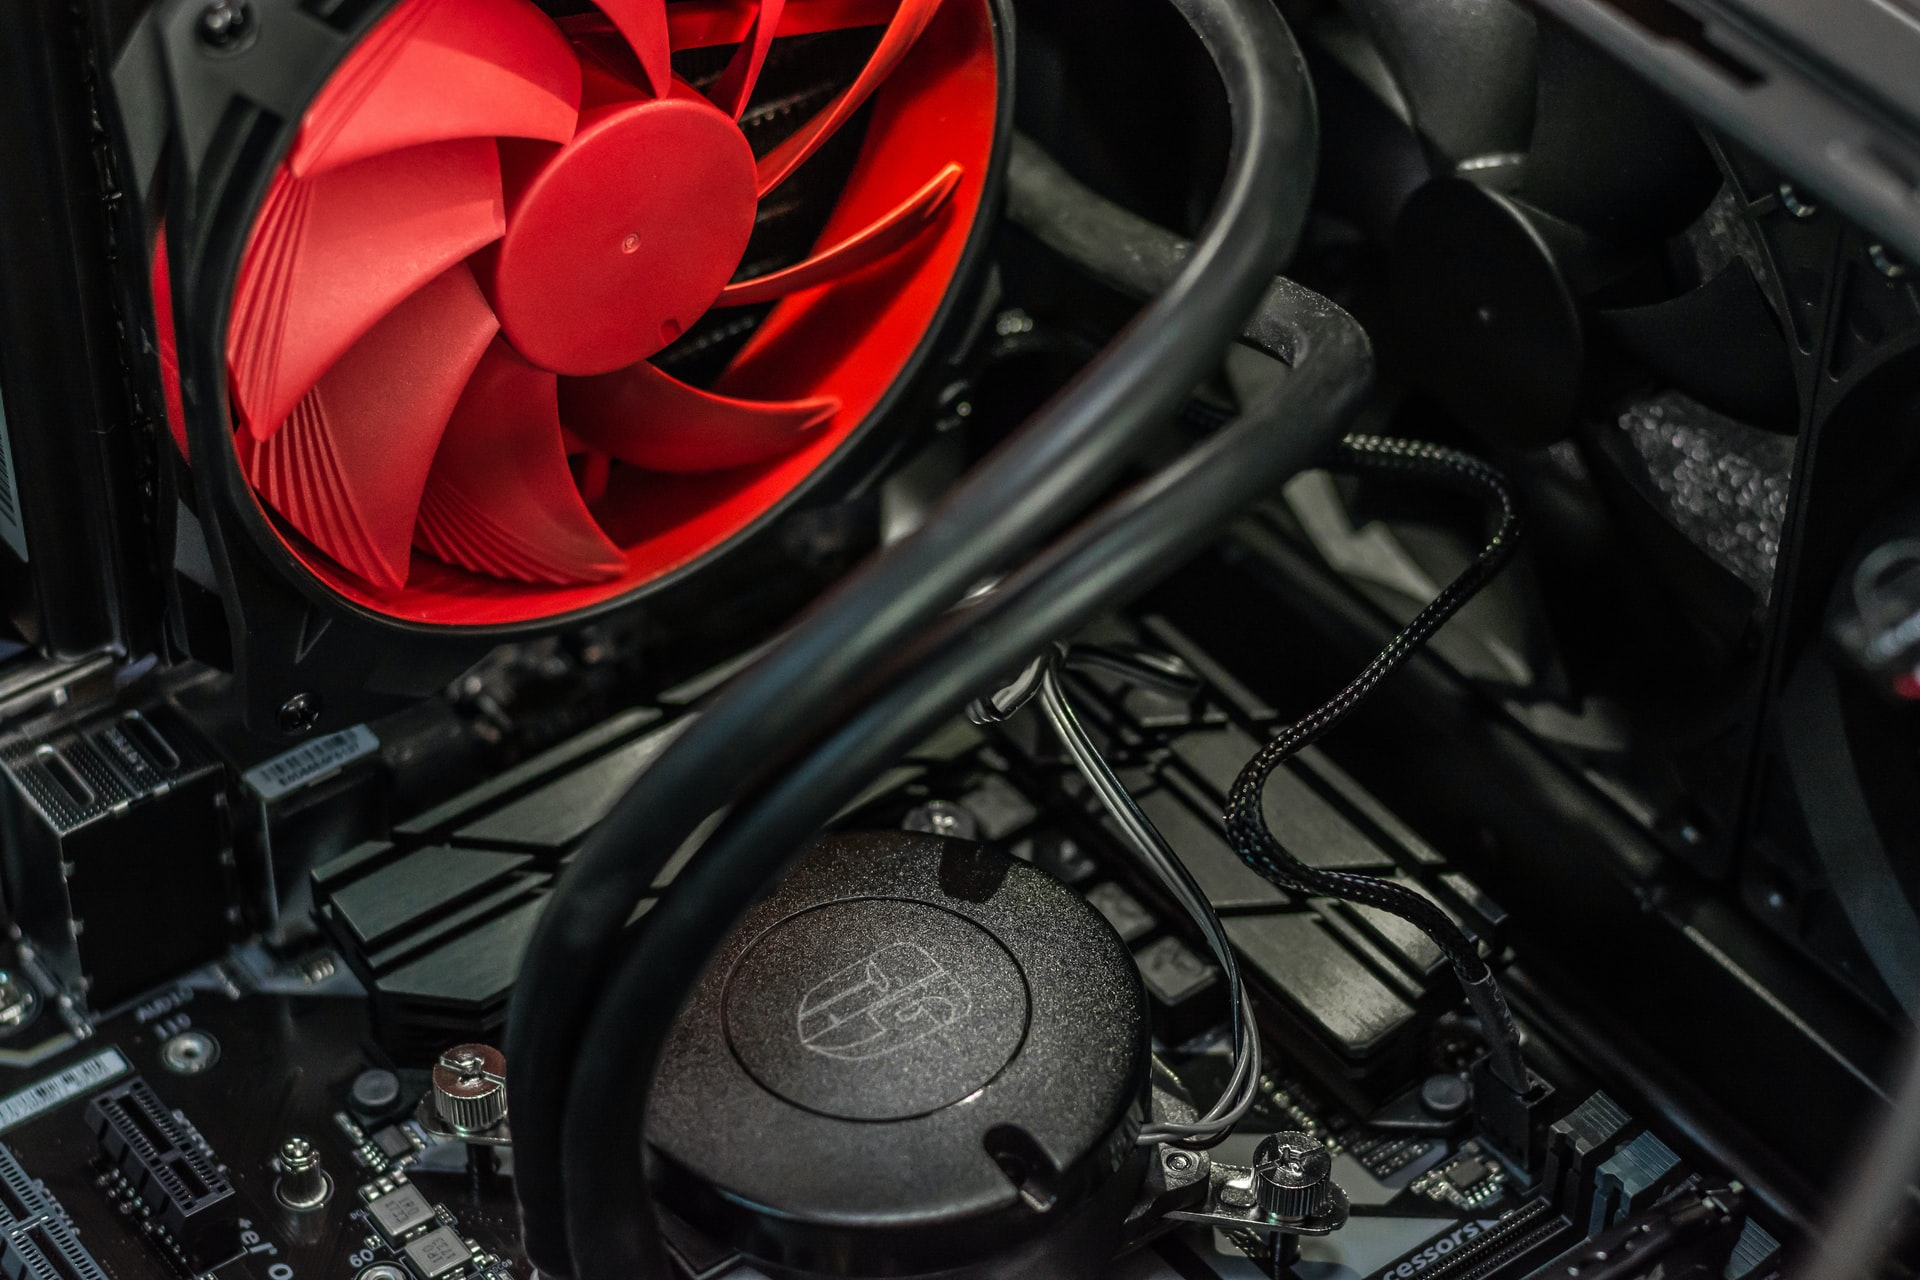 Cooling your computer – what to choose to lower the temperature?